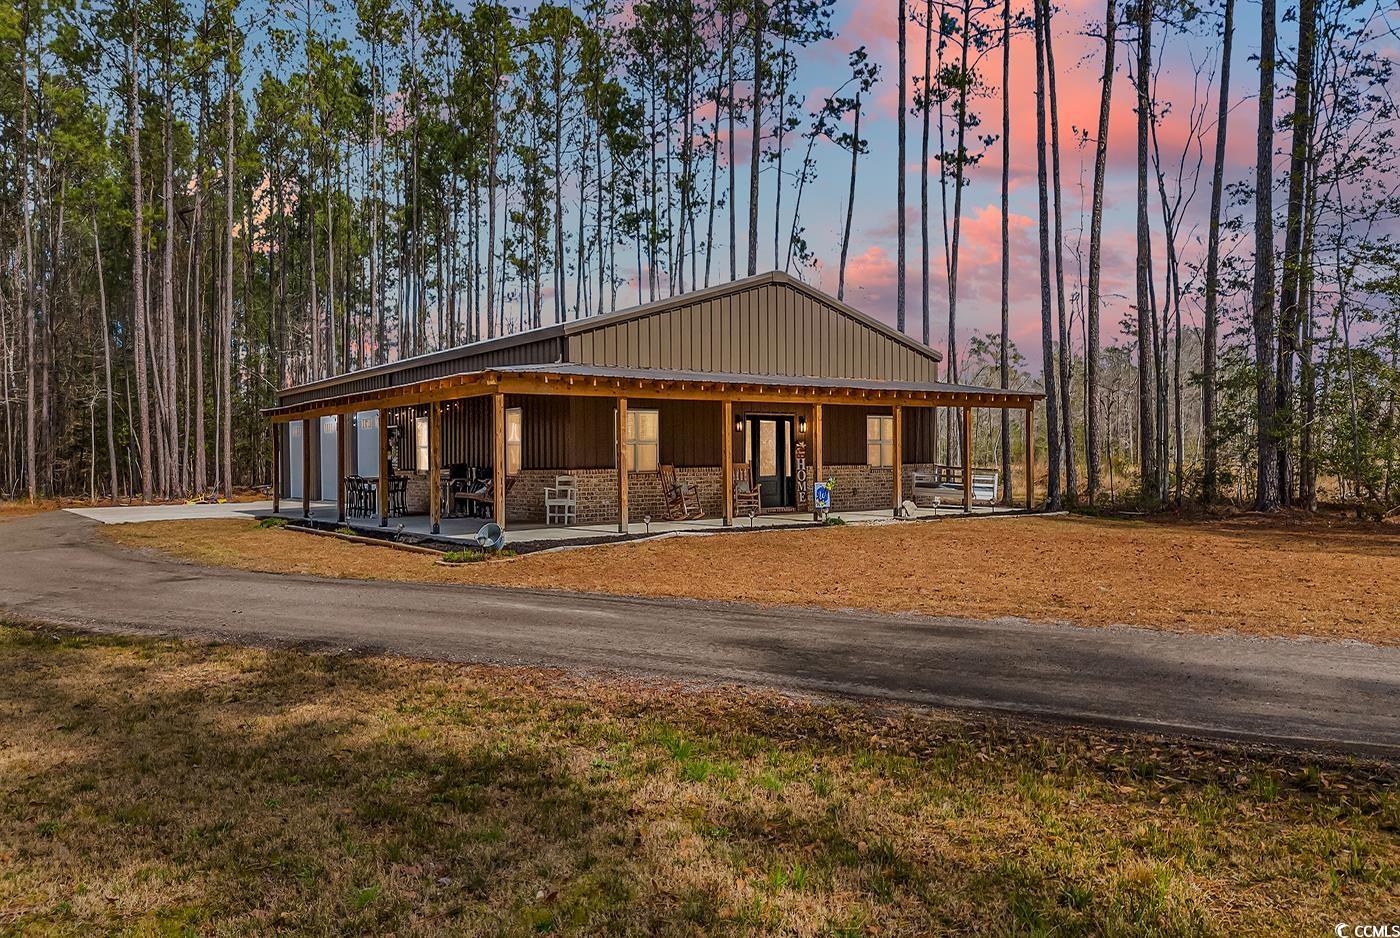 BARNDOMINIUM LOVERS! This is your chance to purchase a rare gem in Horry County. This 40x80x12 barndominium is built and ready for its new owners. It sits on a comfortable 12+ acre lot, and over 800 feet from the highway nestled into the pines, and located safely beside the Pitch Landing fire station. The home offer 4 bedrooms, two full bathrooms, and a half bath located inside the shop portion of the building. There are three 10x10 garage doors to the shop, as well as an exit door to the outside. There is also a detached 20x24 metal shop on concrete slab with two 8x10 garage doors. Inside the home offers two pantry’s, stainless steel appliances, solid surface counter tops, and a beautiful brick fireplace.  The laundry room is located inside the massive master closet. The 64-gun safe inside the master closet conveys with the sale as well, as the rooms were built around it. There is so much to see here. There is over 1,000 square foot of wrap around porch, a fire land surrounding the property, and even a sandbox for the kids to play in while you work in the workshop. You will be 6 minutes to downtown Conway, 25 minutes to the City of Myrtle Beach, and only 35 minutes to the Historic City of Georgetown.